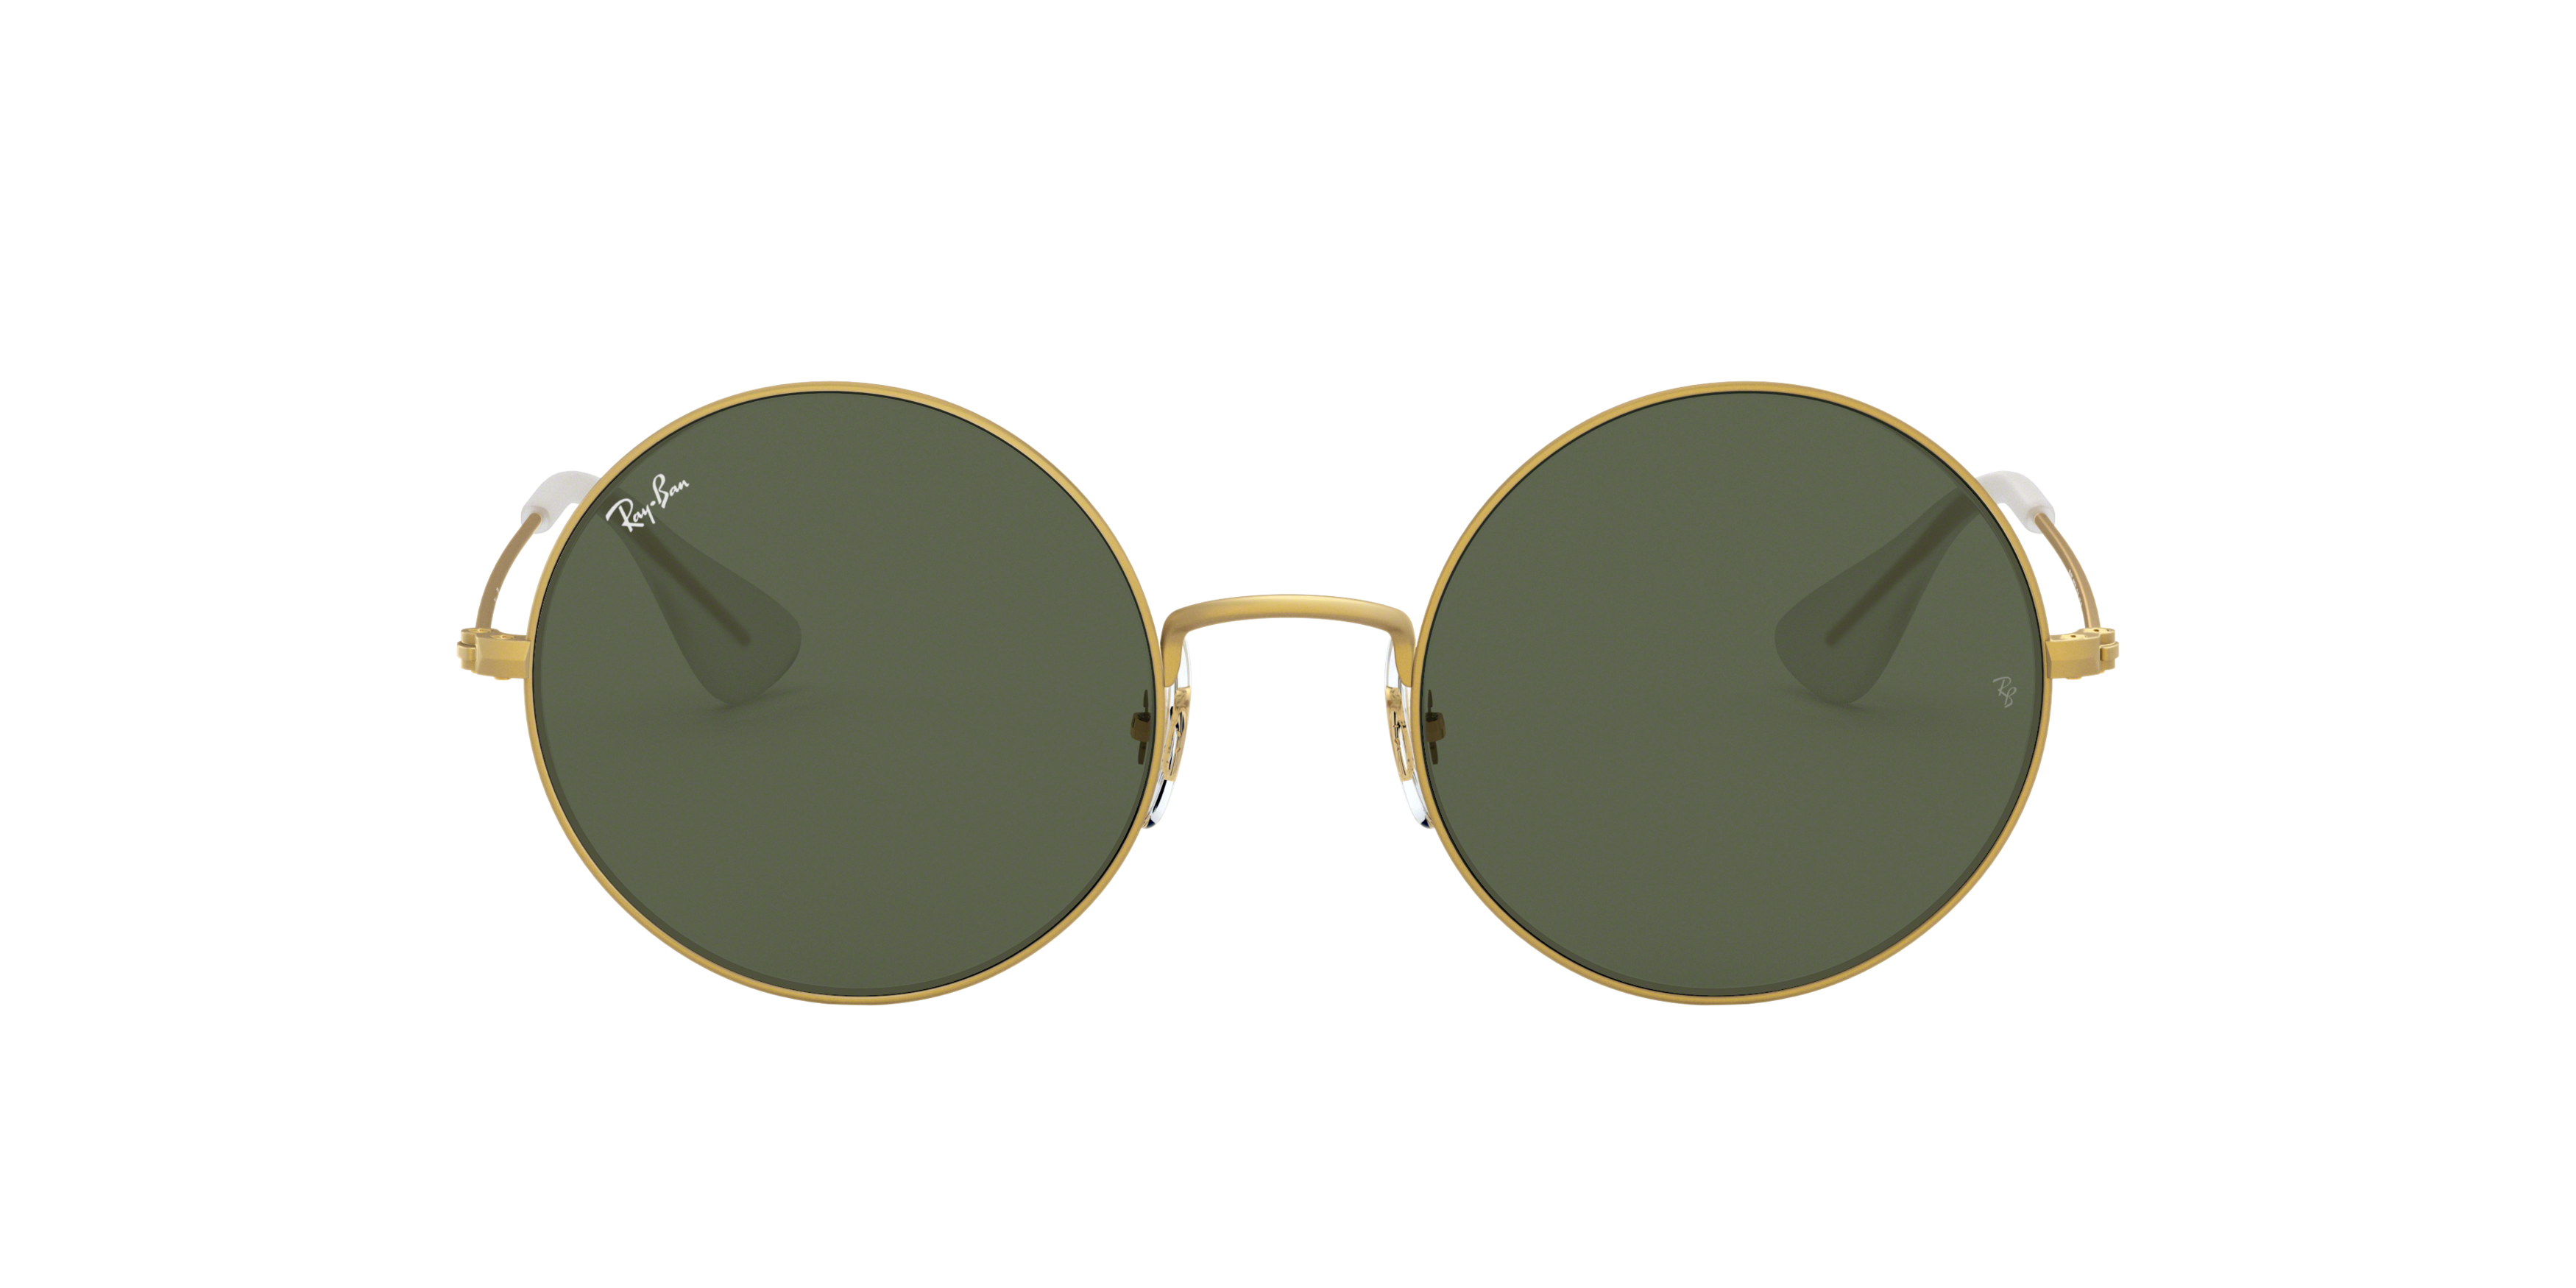 [products.image.front] Ray-Ban Ja-Jo RB3592 901371